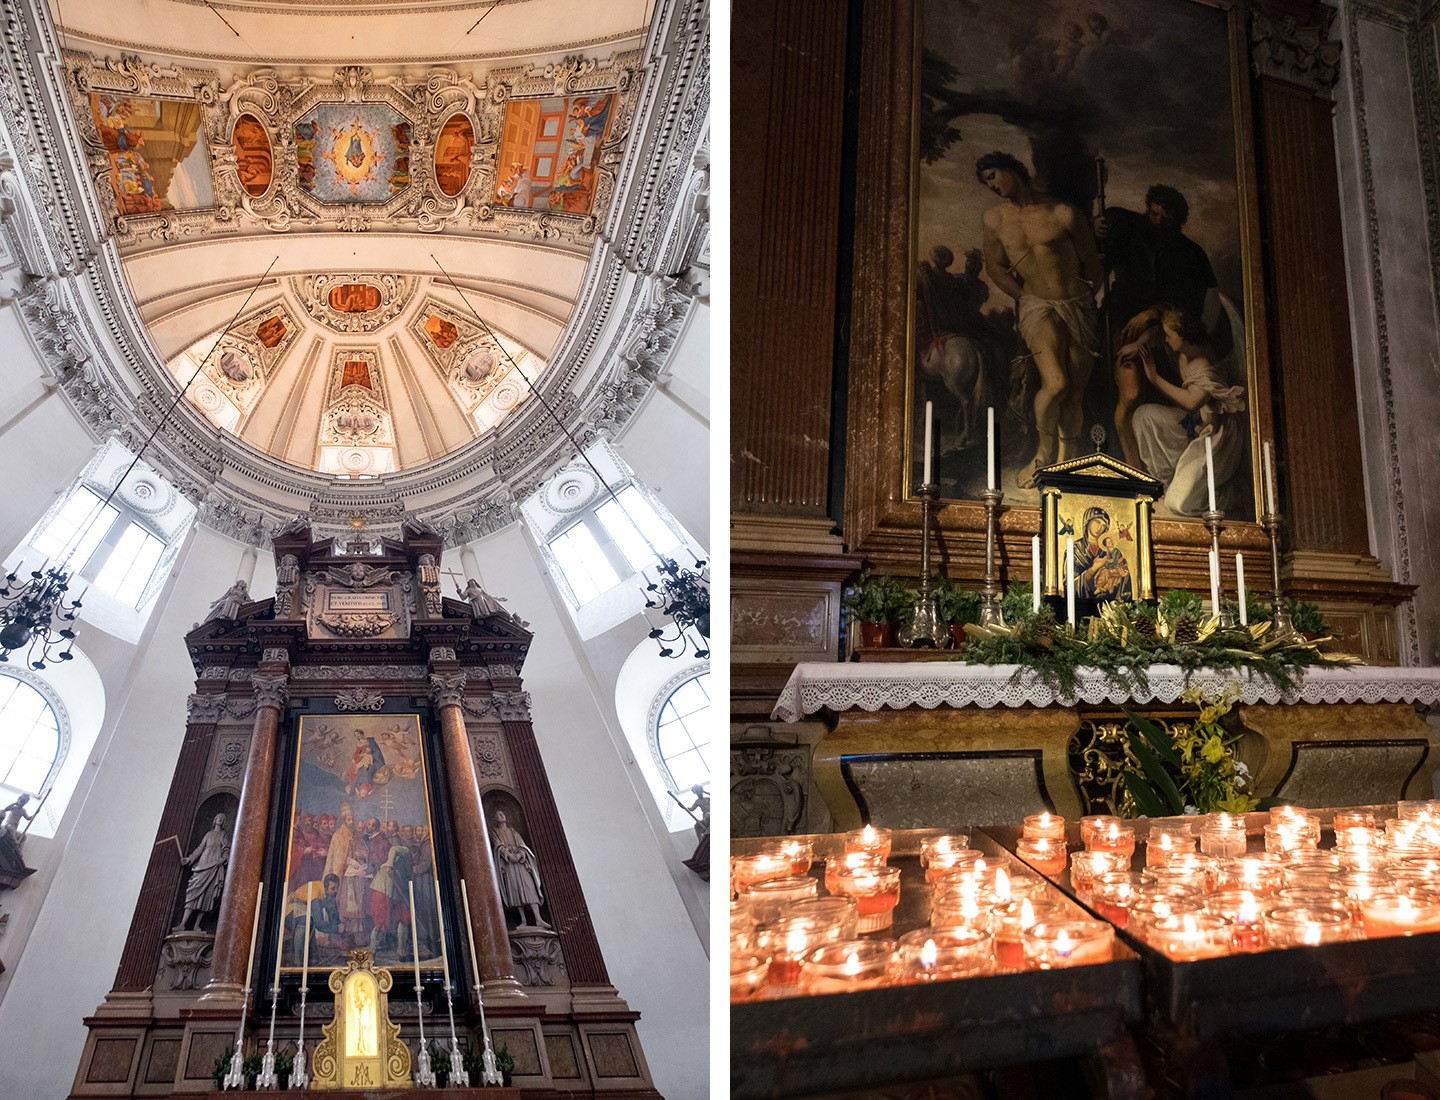 Salzburg cathedral – one of the top things to do in Salzburg